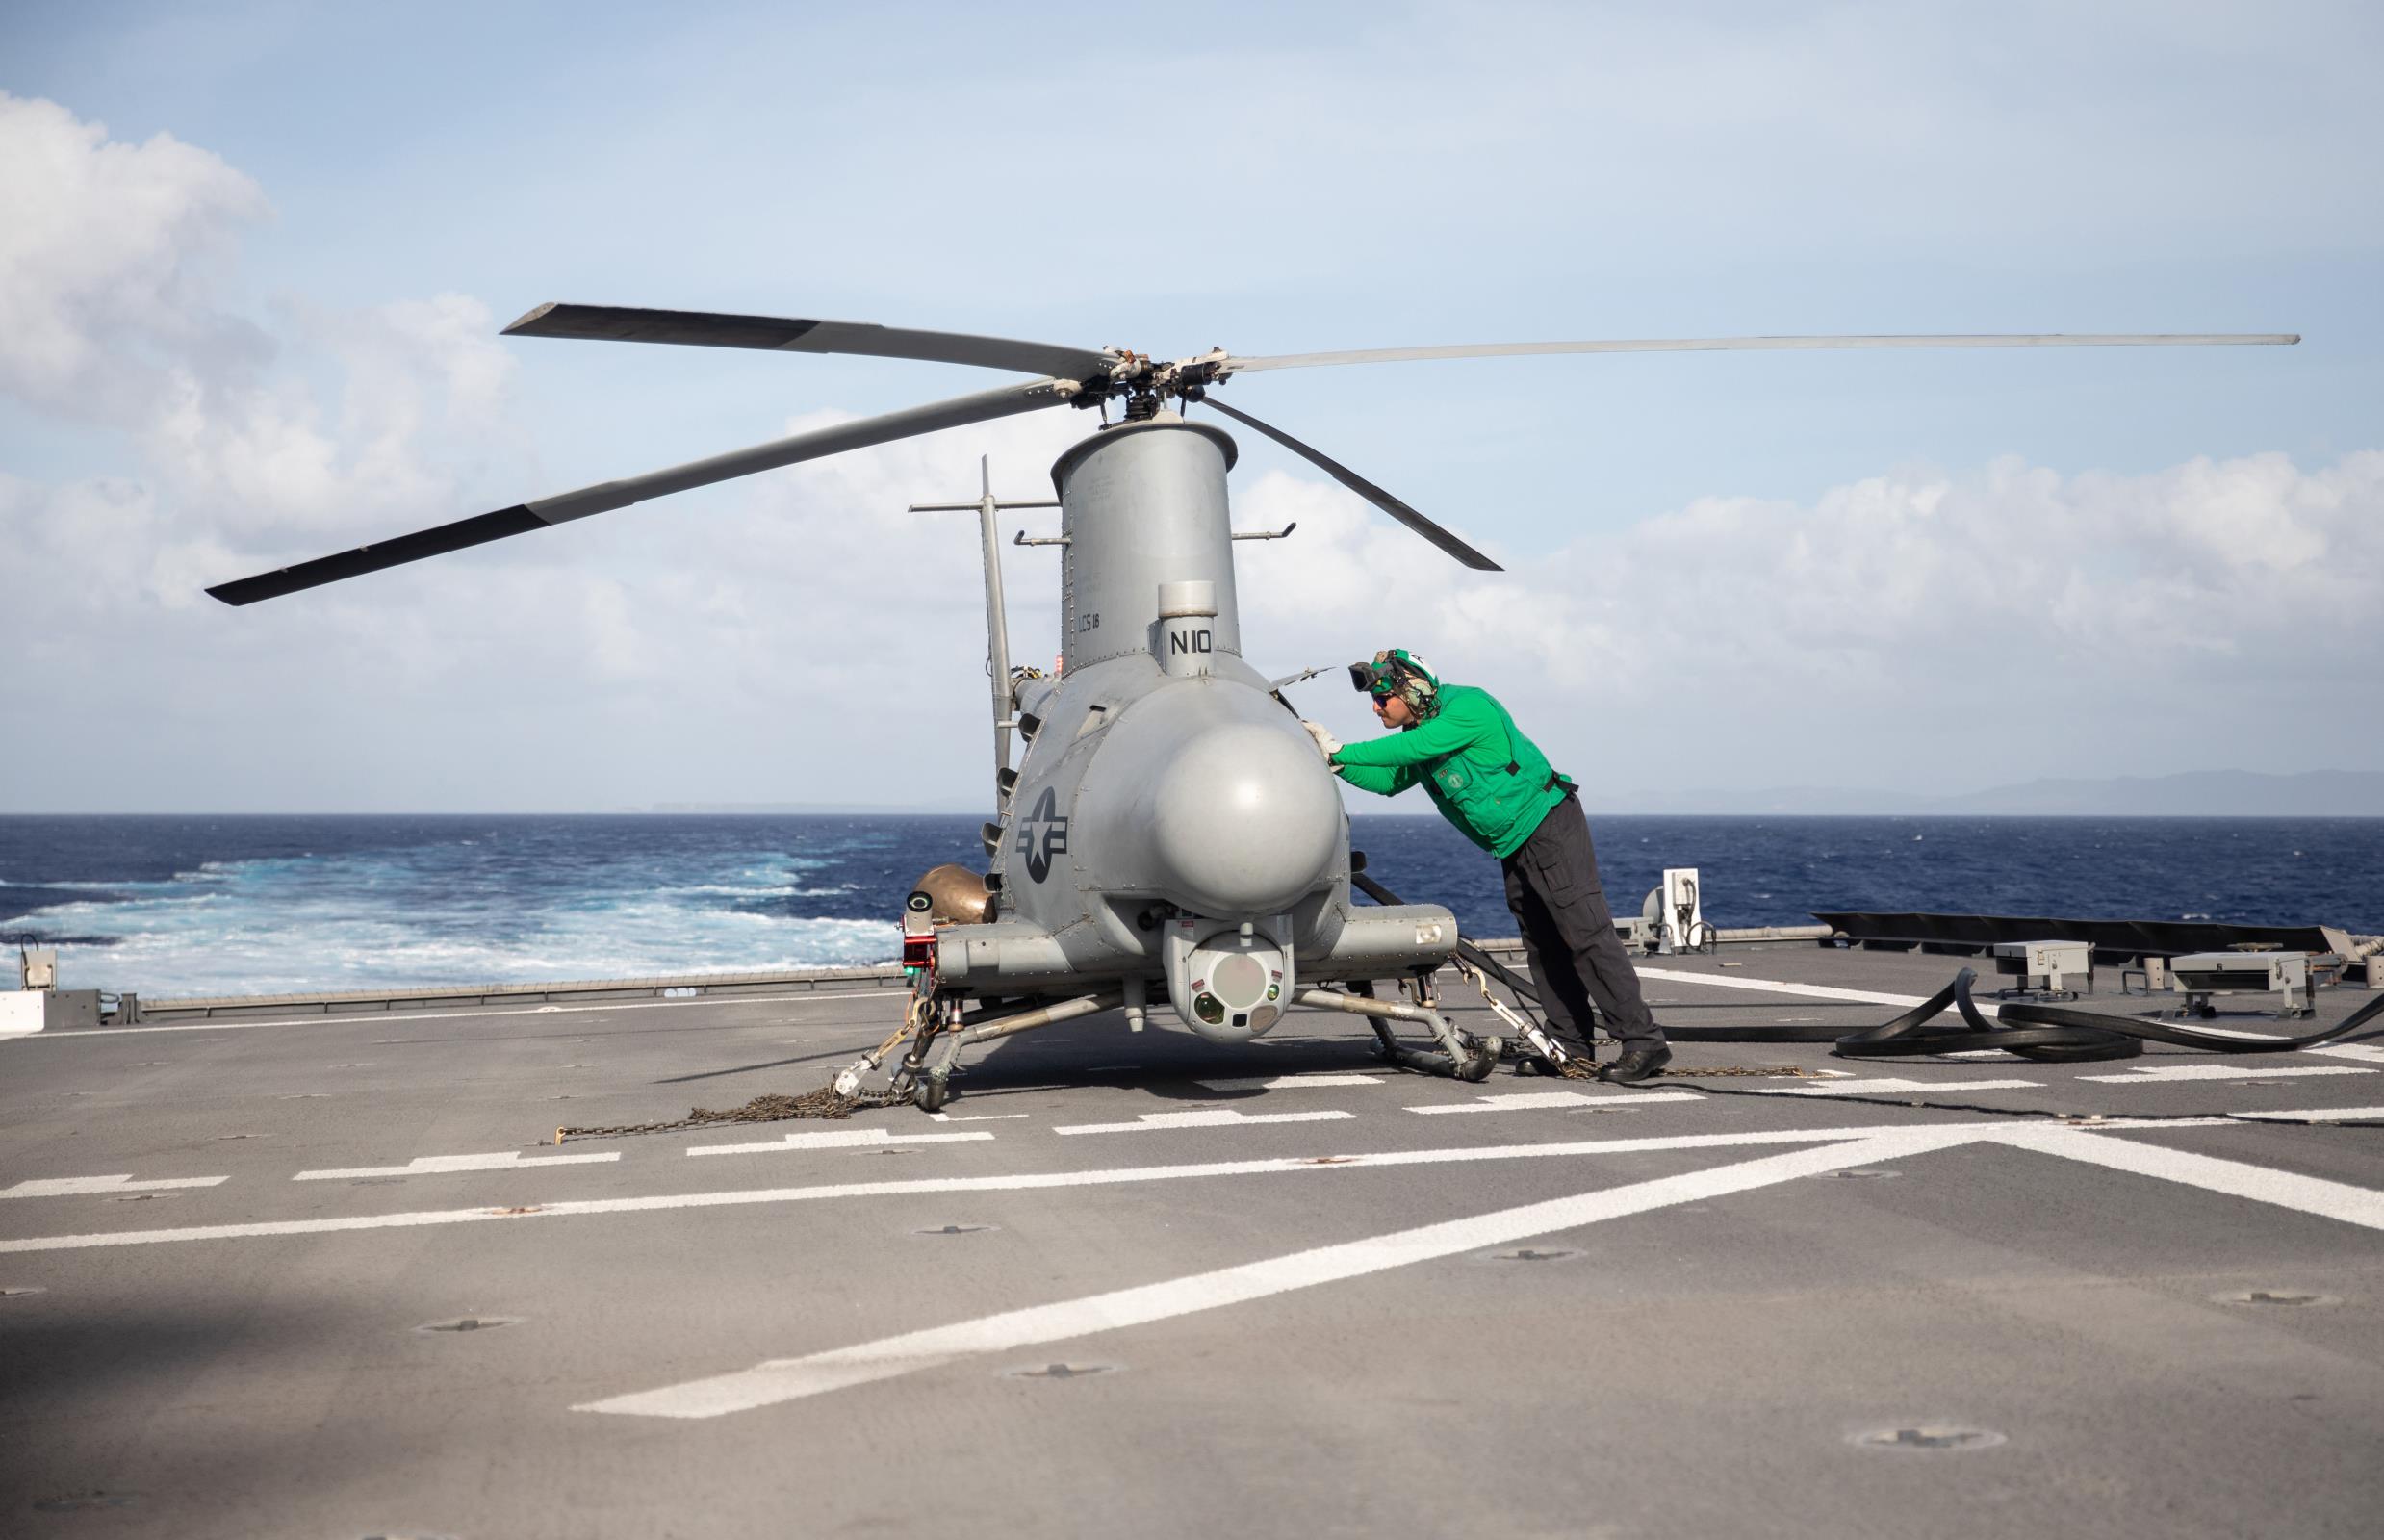 PHILIPPINE SEA (Feb. 14, 2022) Aviation Electronics Technician 2nd Class Joshua Trevino, from Victoria, Texas, assigned to the “Blackjacks” of Helicopter Sea Combat Squadron (HSC) 21, conducts a pre-flight check on an MQ-8B Fire Scout unmanned aerial vehicle aboard the Independence-variant littoral combat ship USS Tulsa (LCS 16).